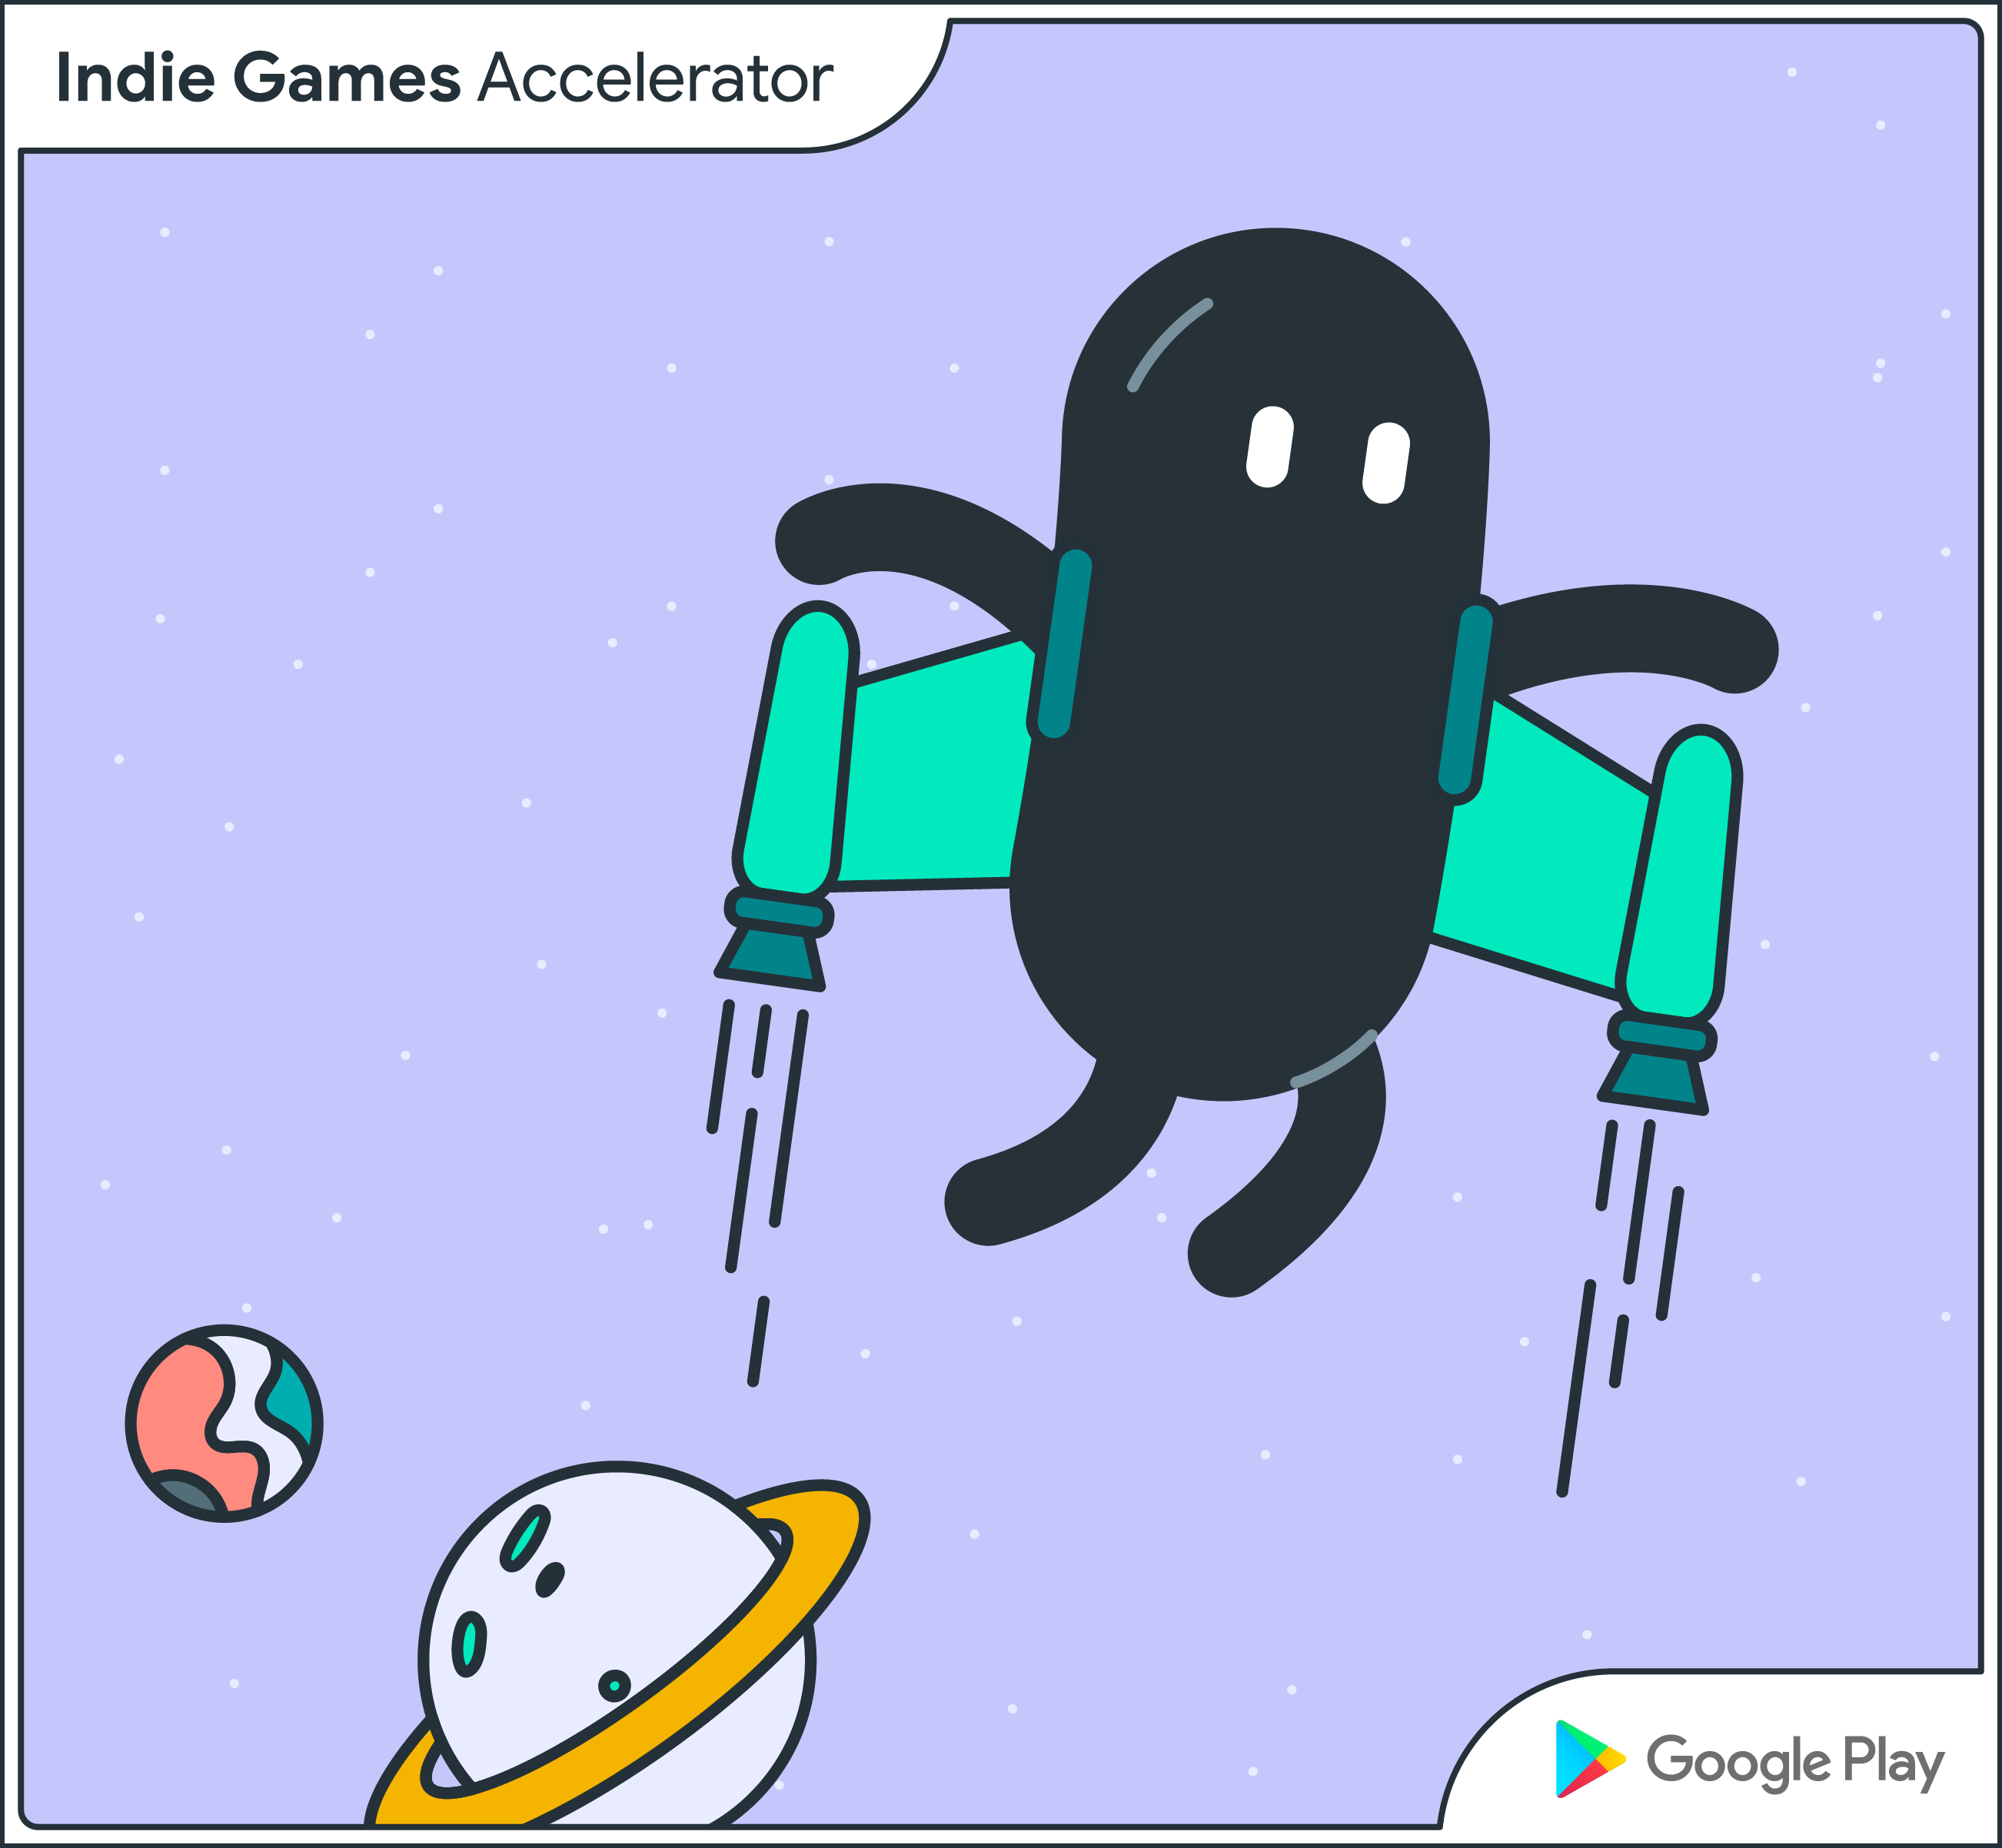 Grow your indie game with help from Google Play